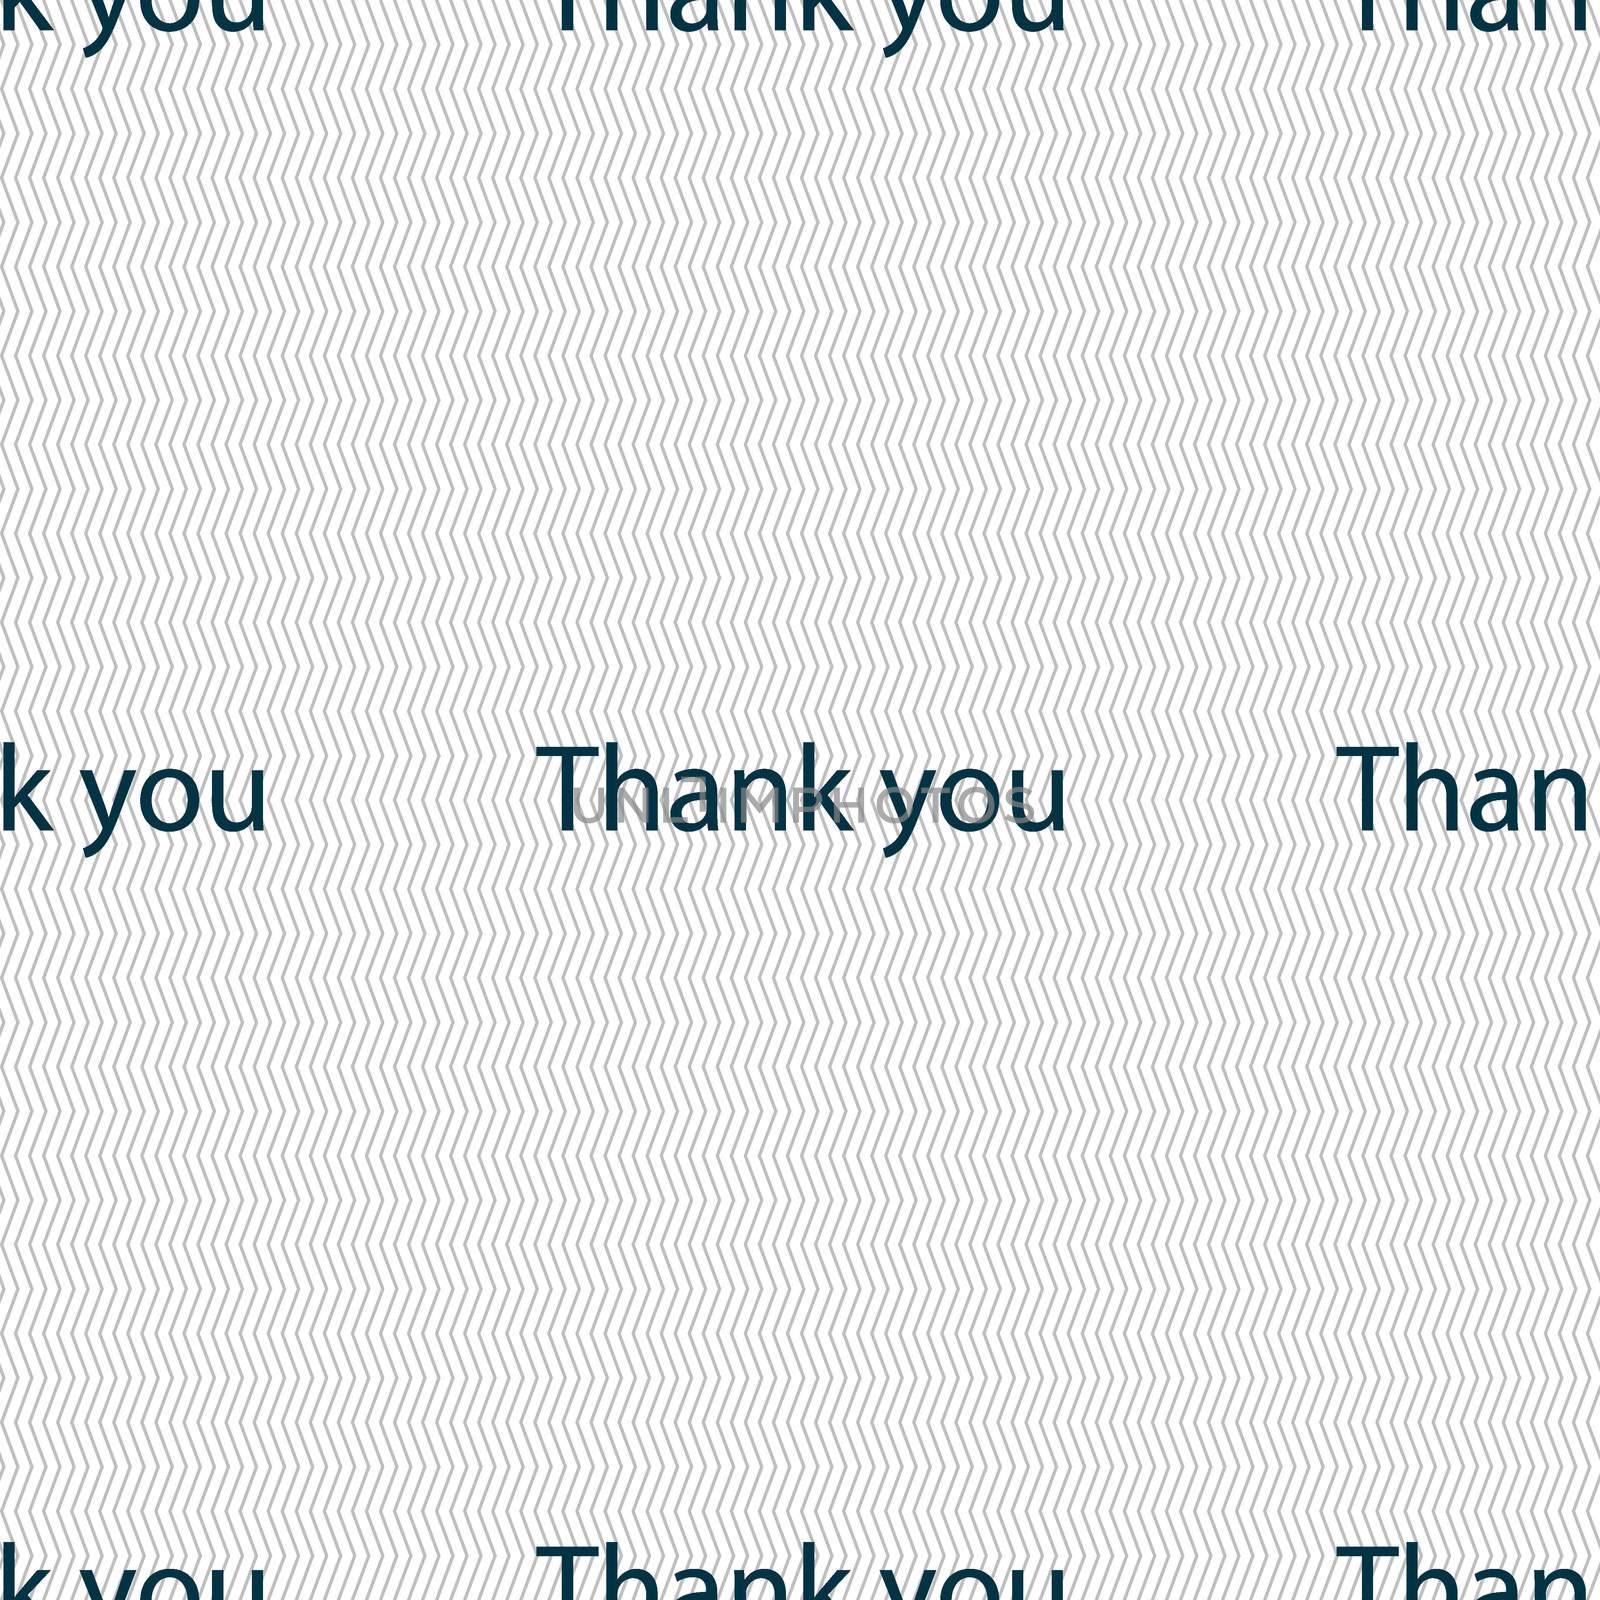 Thank you sign icon. Gratitude symbol. Seamless abstract background with geometric shapes.  by serhii_lohvyniuk